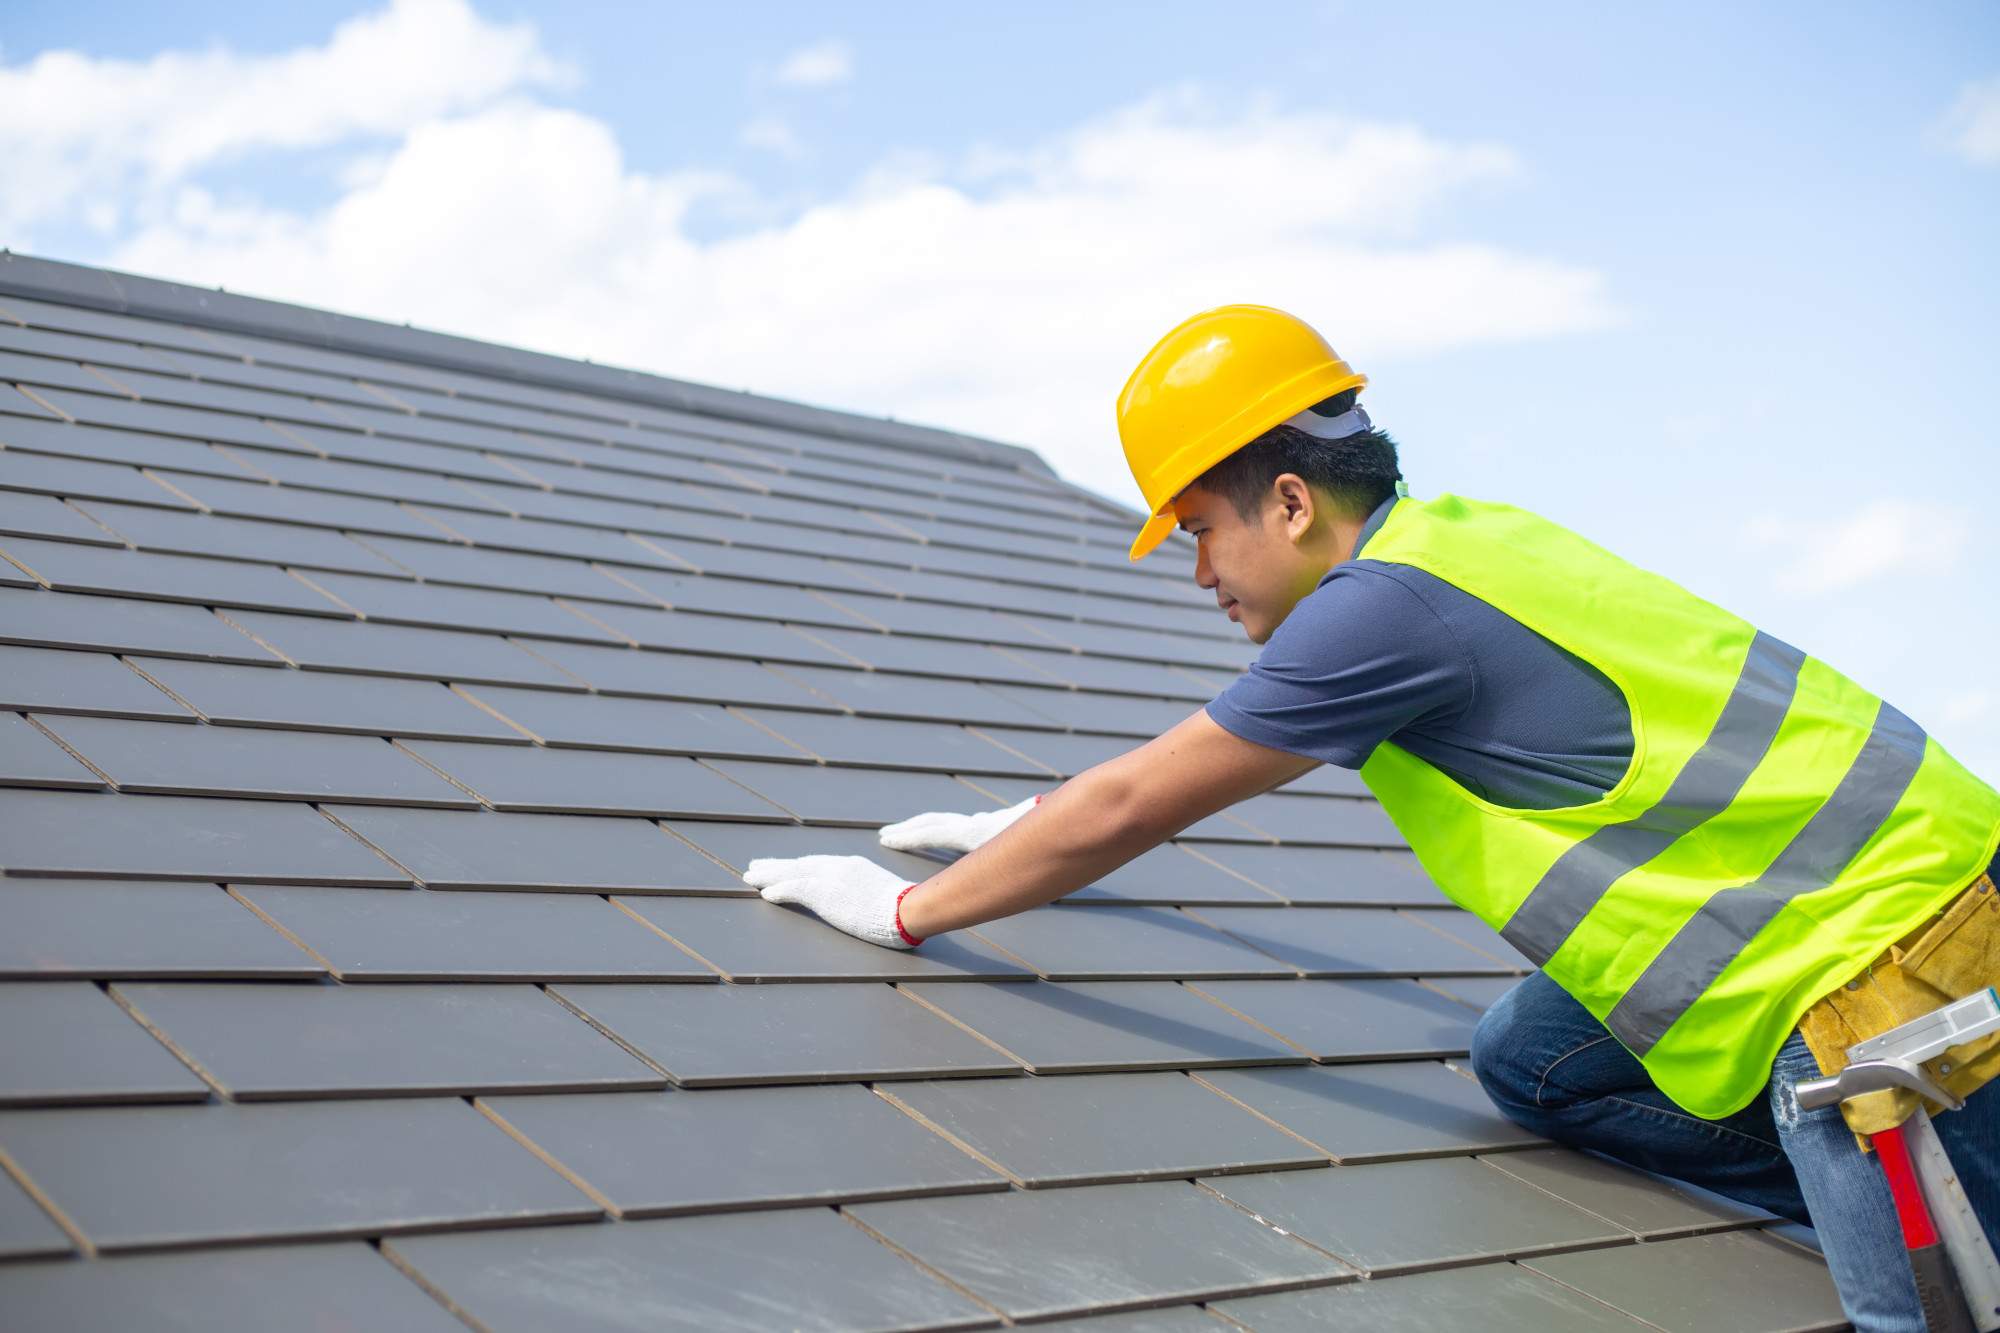 What Questions Should I Ask the Best Roofing Company When Hiring Them?